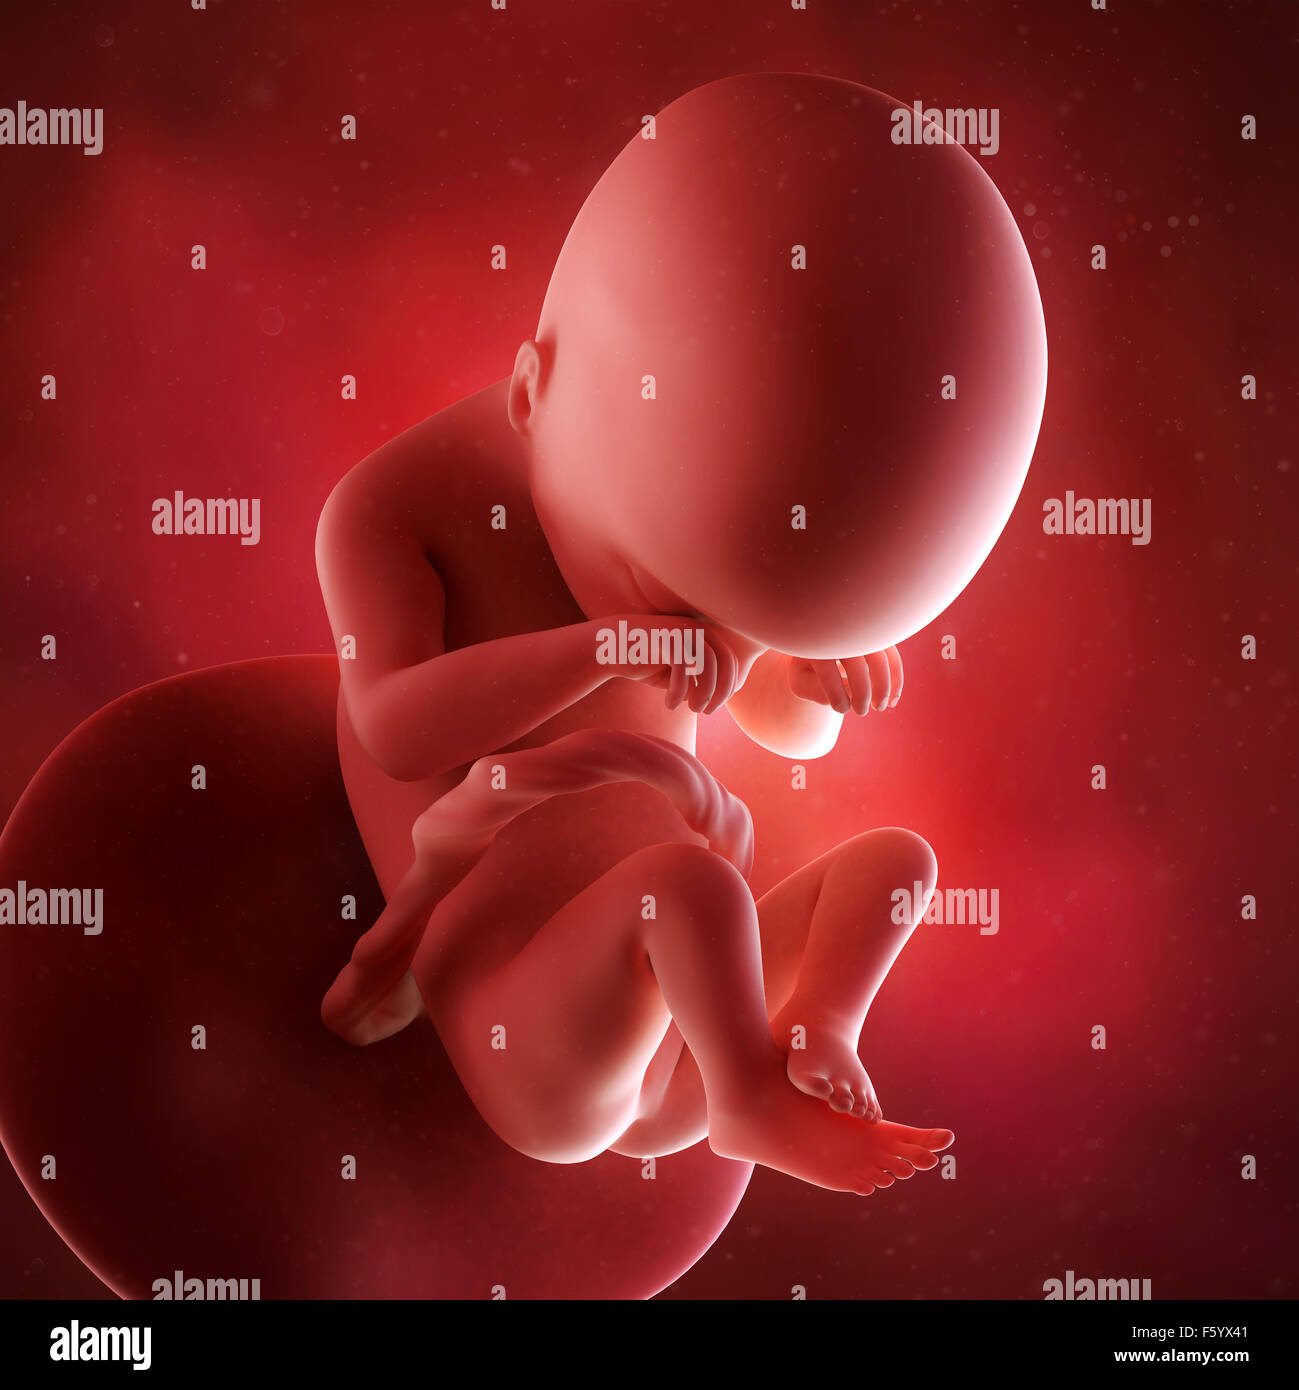 medical accurate 3d illustration of a fetus week 19 Stock Photo